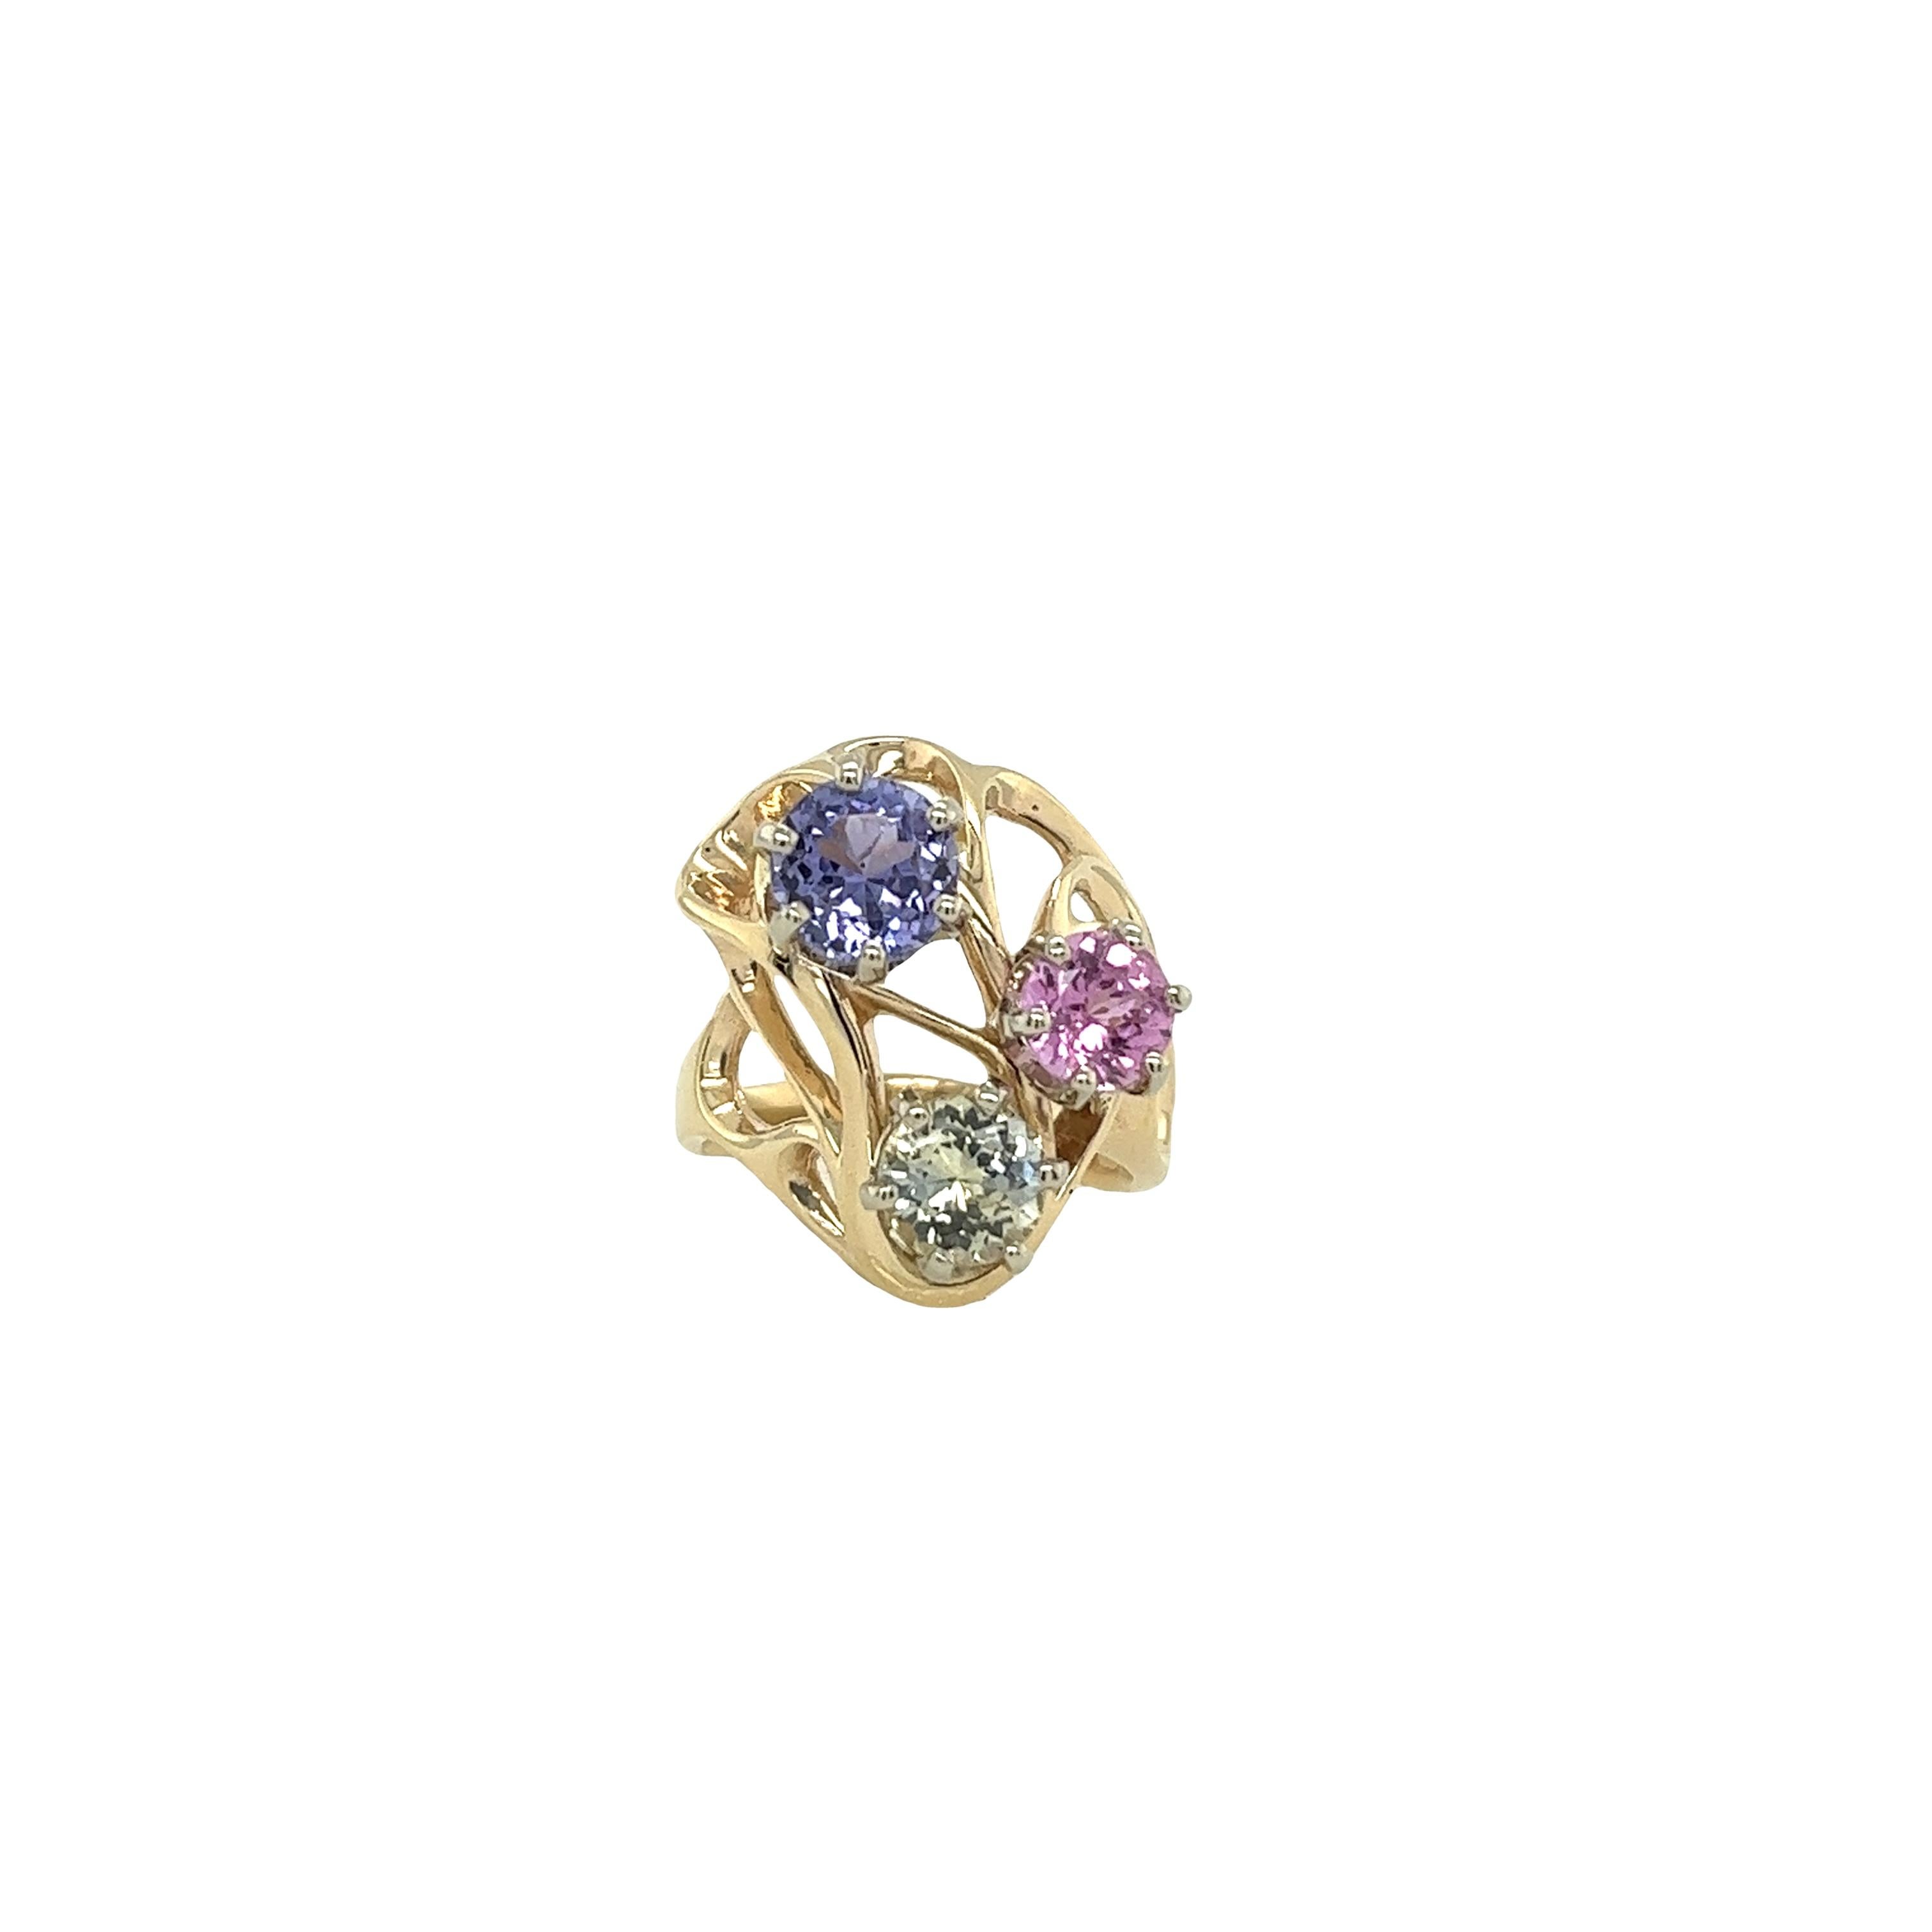 Introducing our exquisite 14ct Yellow Gold Dress Ring, adorned with not one, but three captivating natural Sapphires for a total weight of 2.50 carats.

Width of Band: 2.55mm
Width of Head: 21.80mm
Length of Head: 18.65mm
Total  Weight: 9.2g
Ring